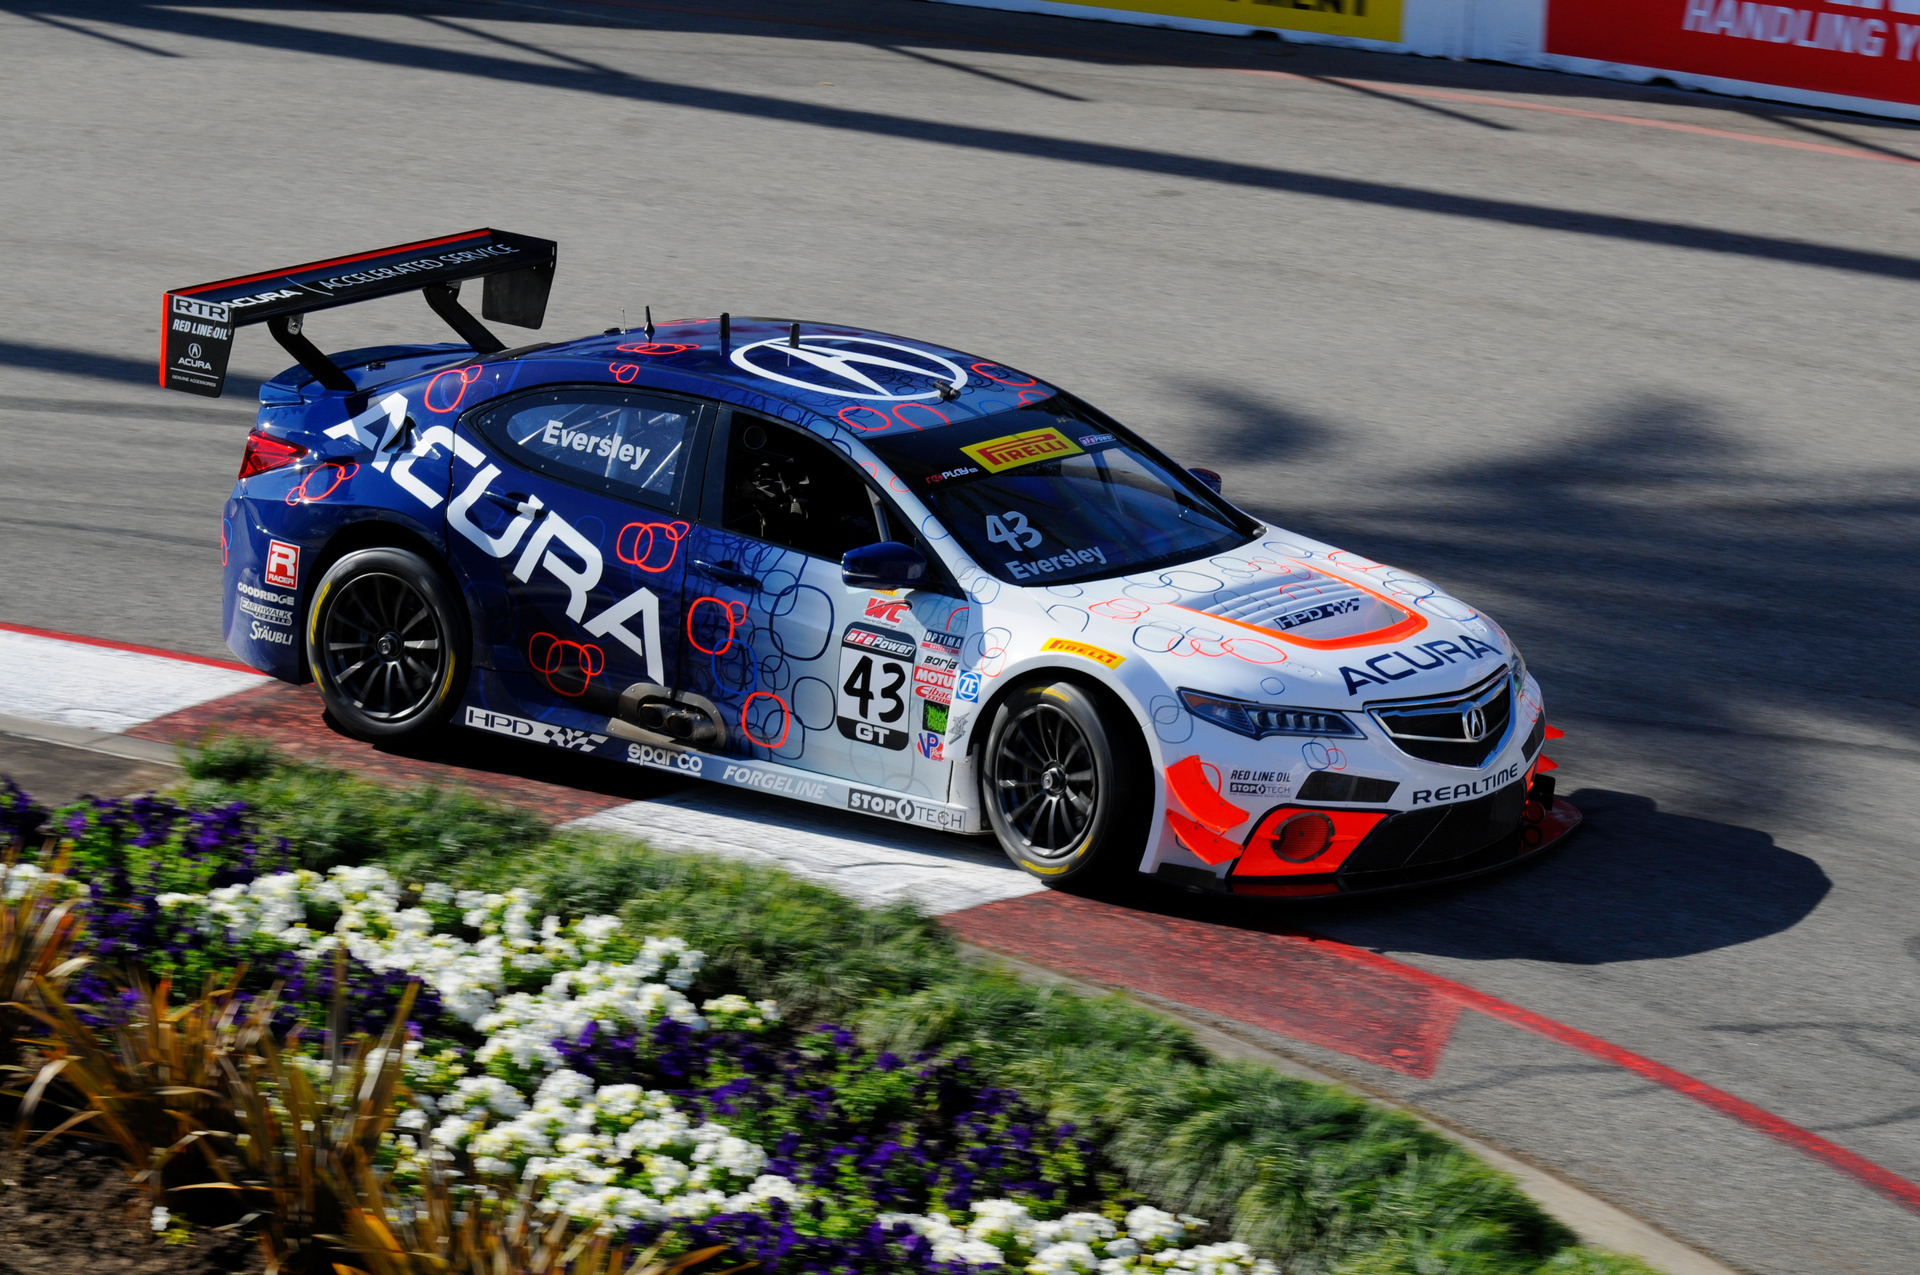 Ryan Eversley again led the Acura attack at Long Beach, coming through the field after an early-race pit stop to finish seventh. Teammate Peter Cunningham finished 12th after late-race contact resulted in a spin © Honda Motor Co., Ltd.